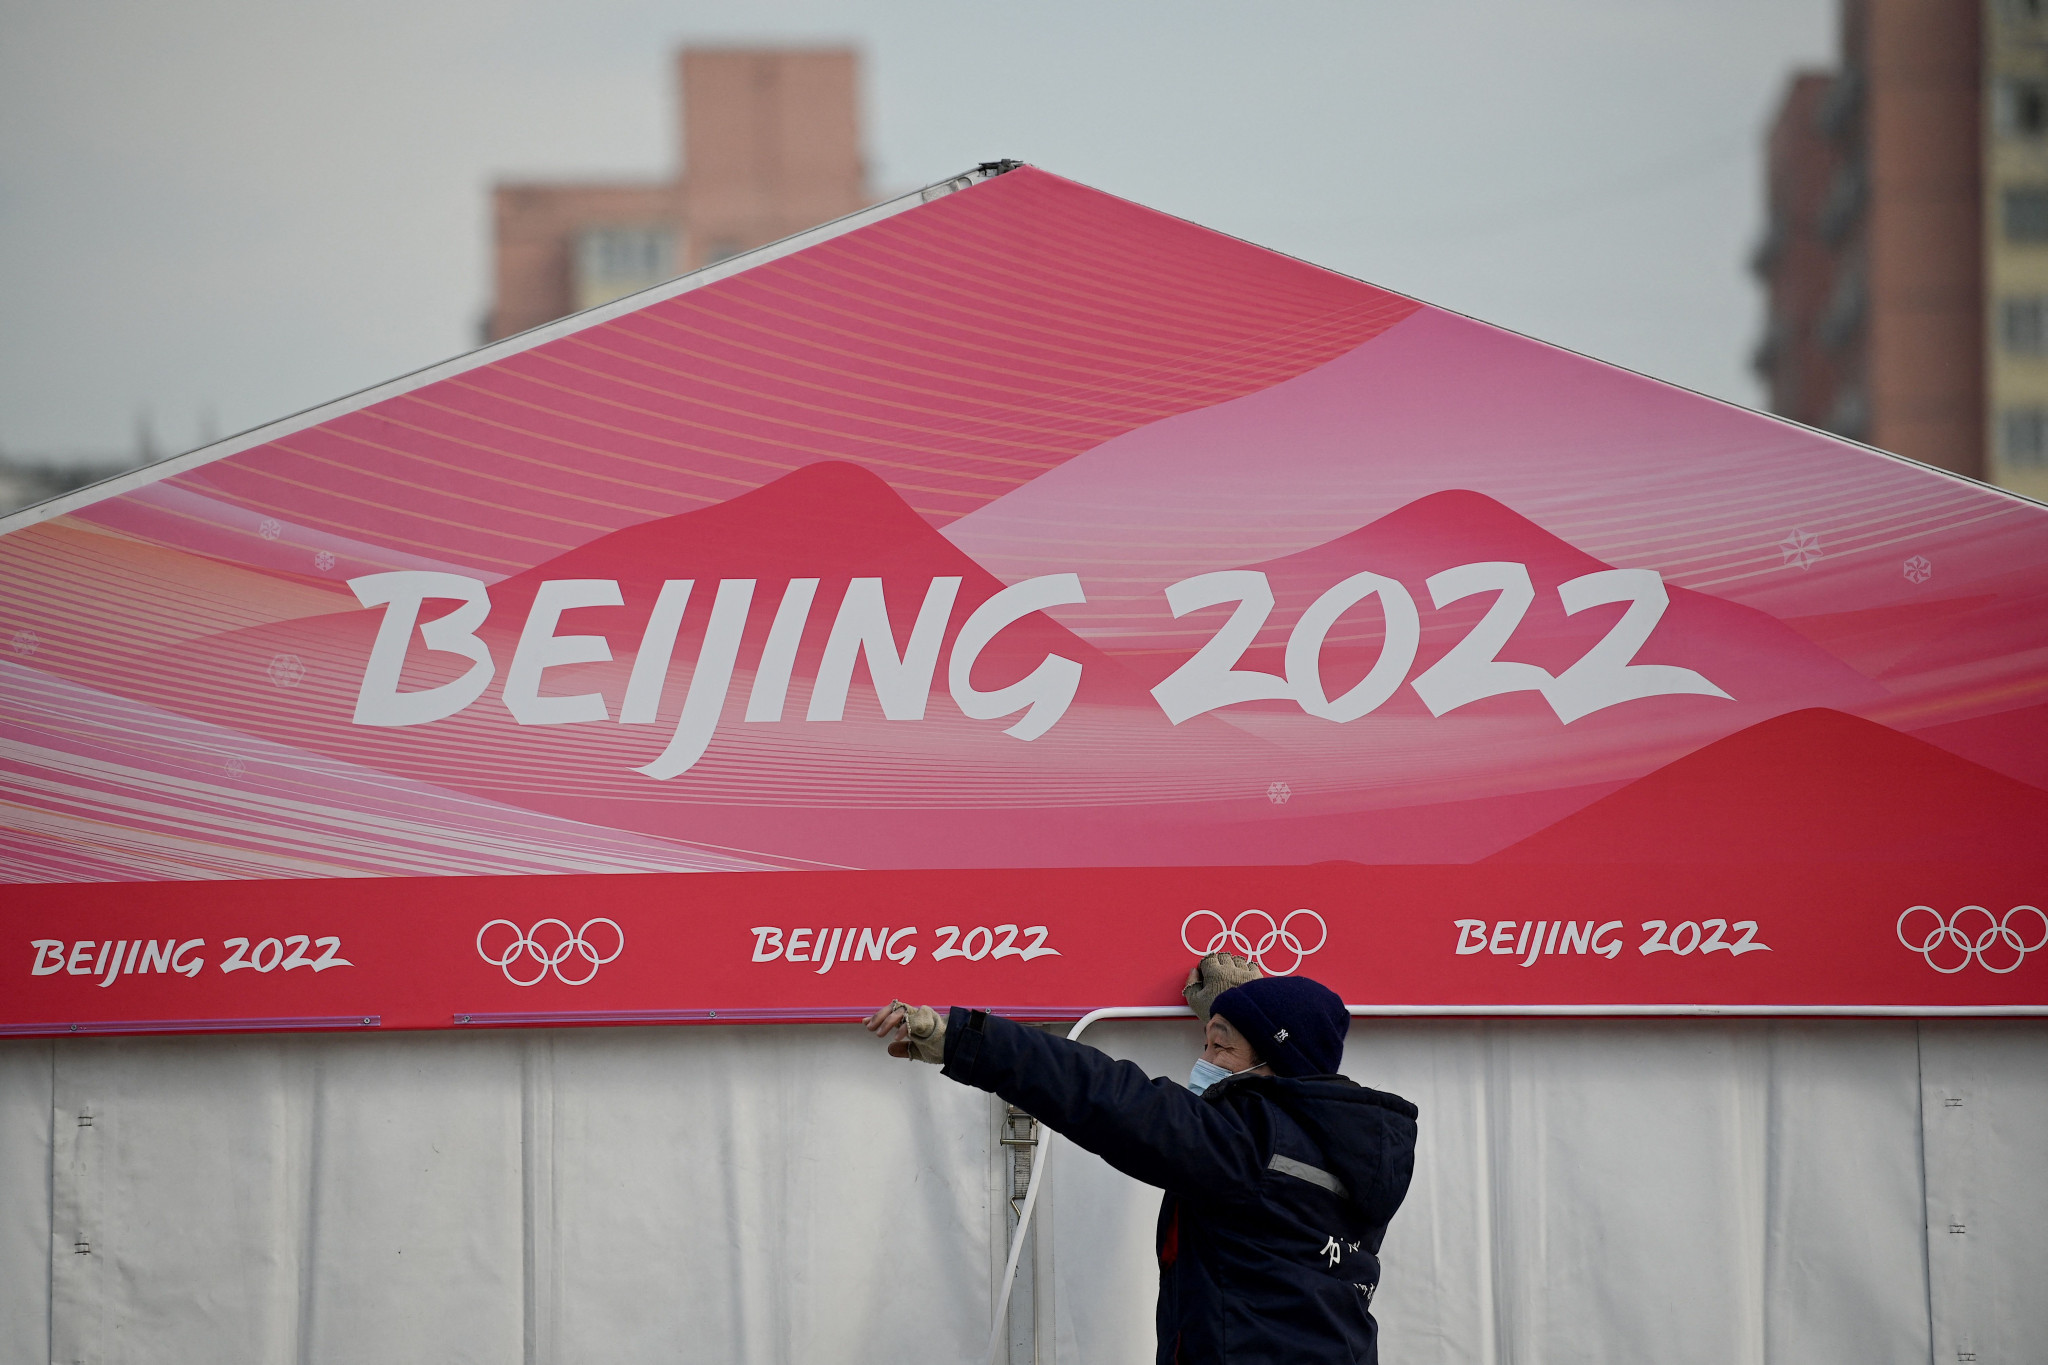 China has increased its COVID-19 countermeasures as it prepares to host Beijing 2022 ©Getty Images